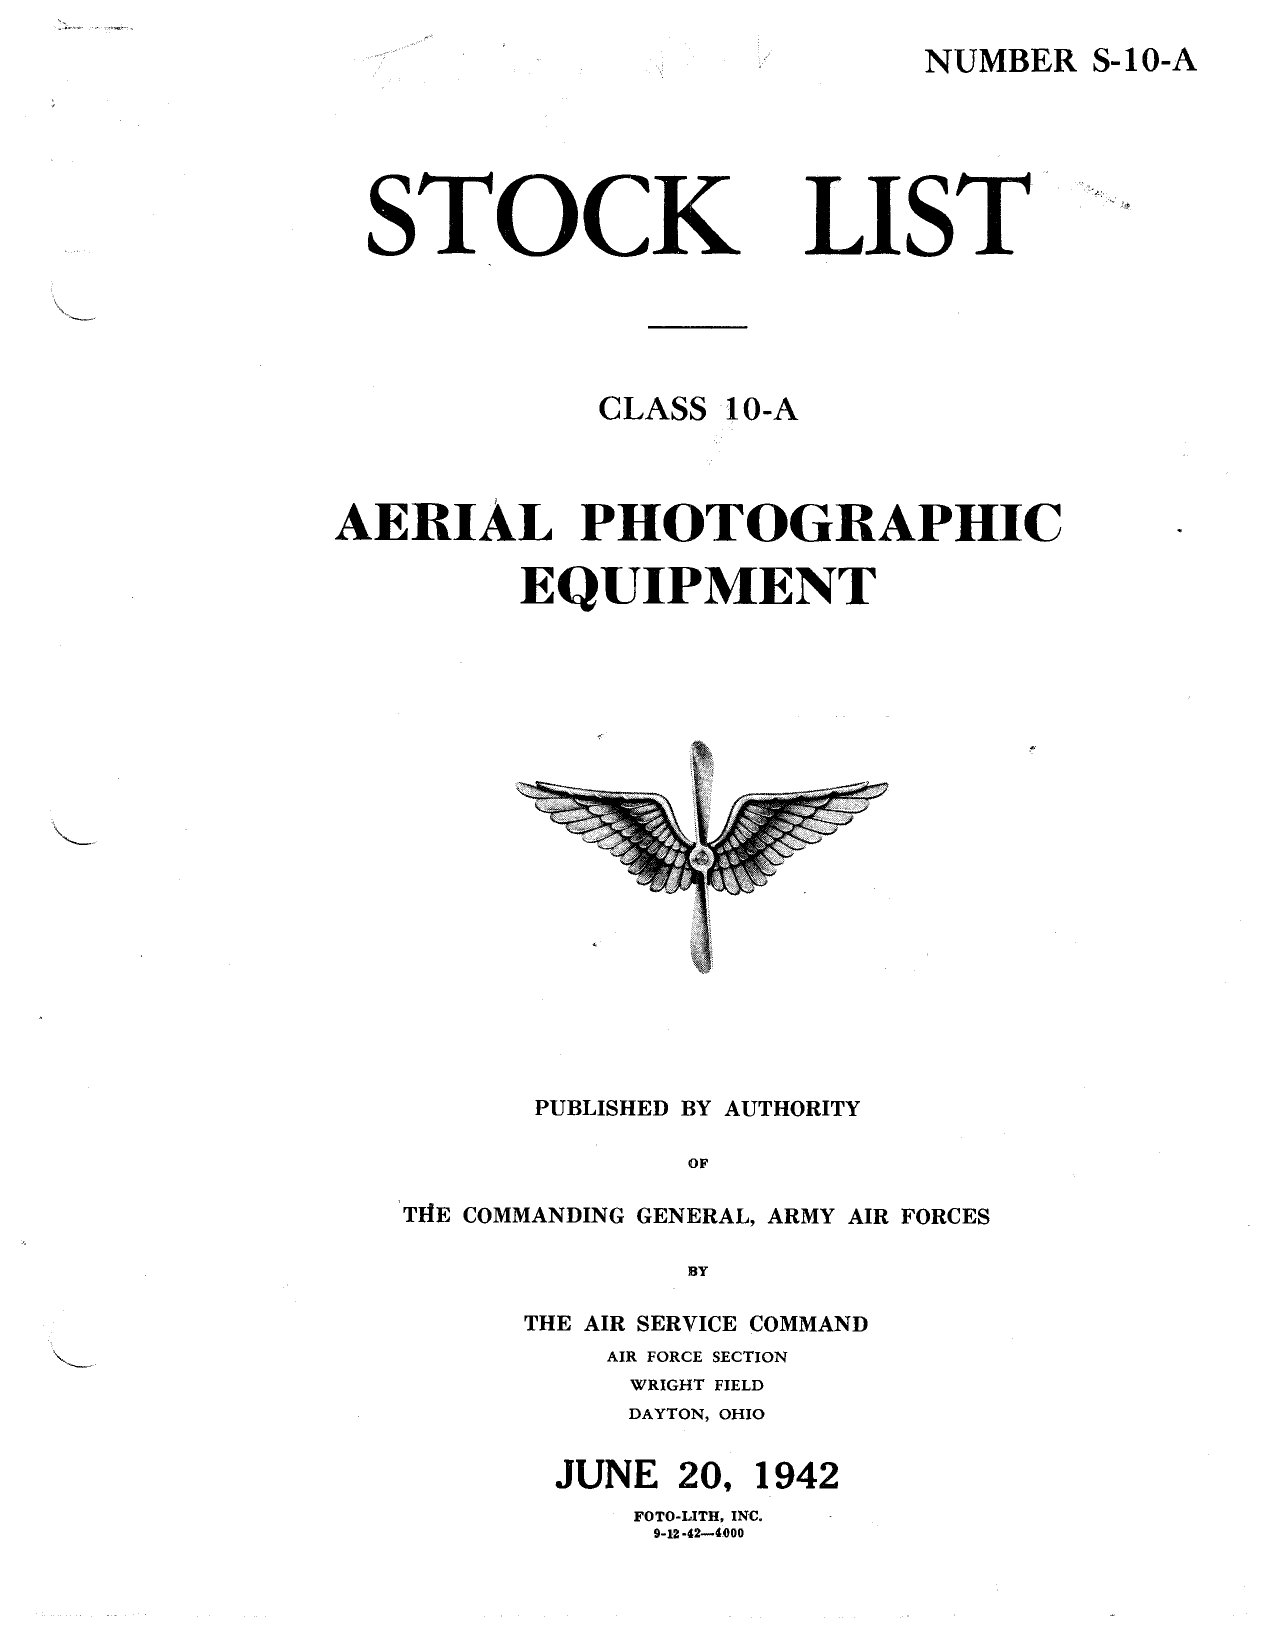 Sample page 1 from AirCorps Library document: Stock List for Aerial Photographic Equipment